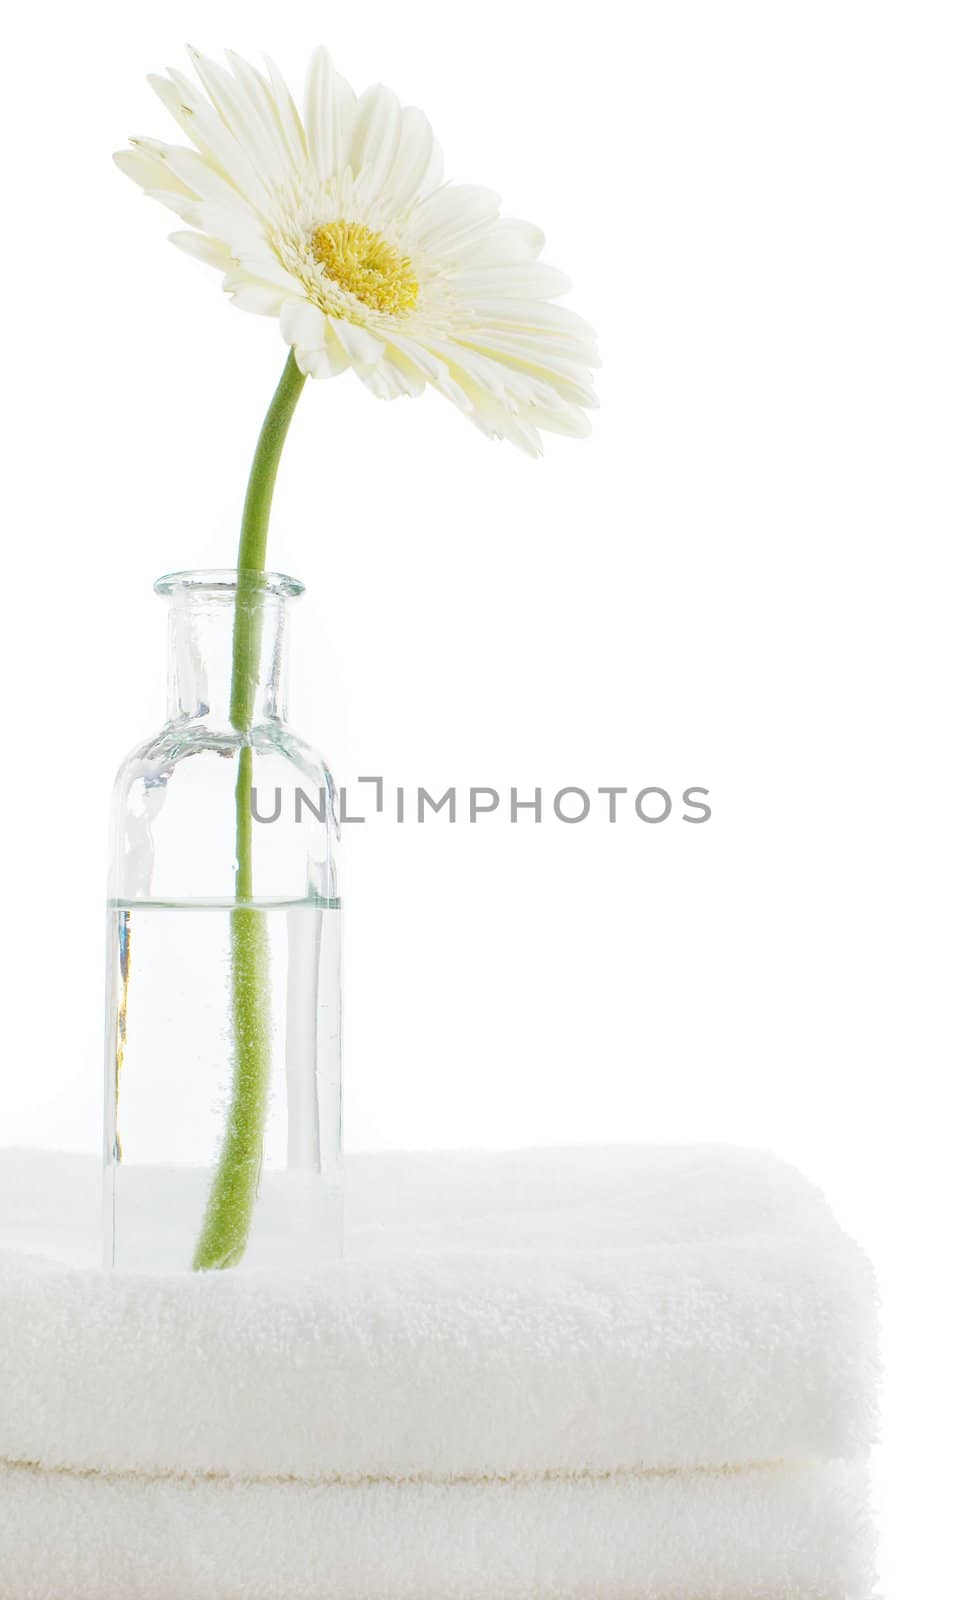 Towel stack with spa objects against a white background.